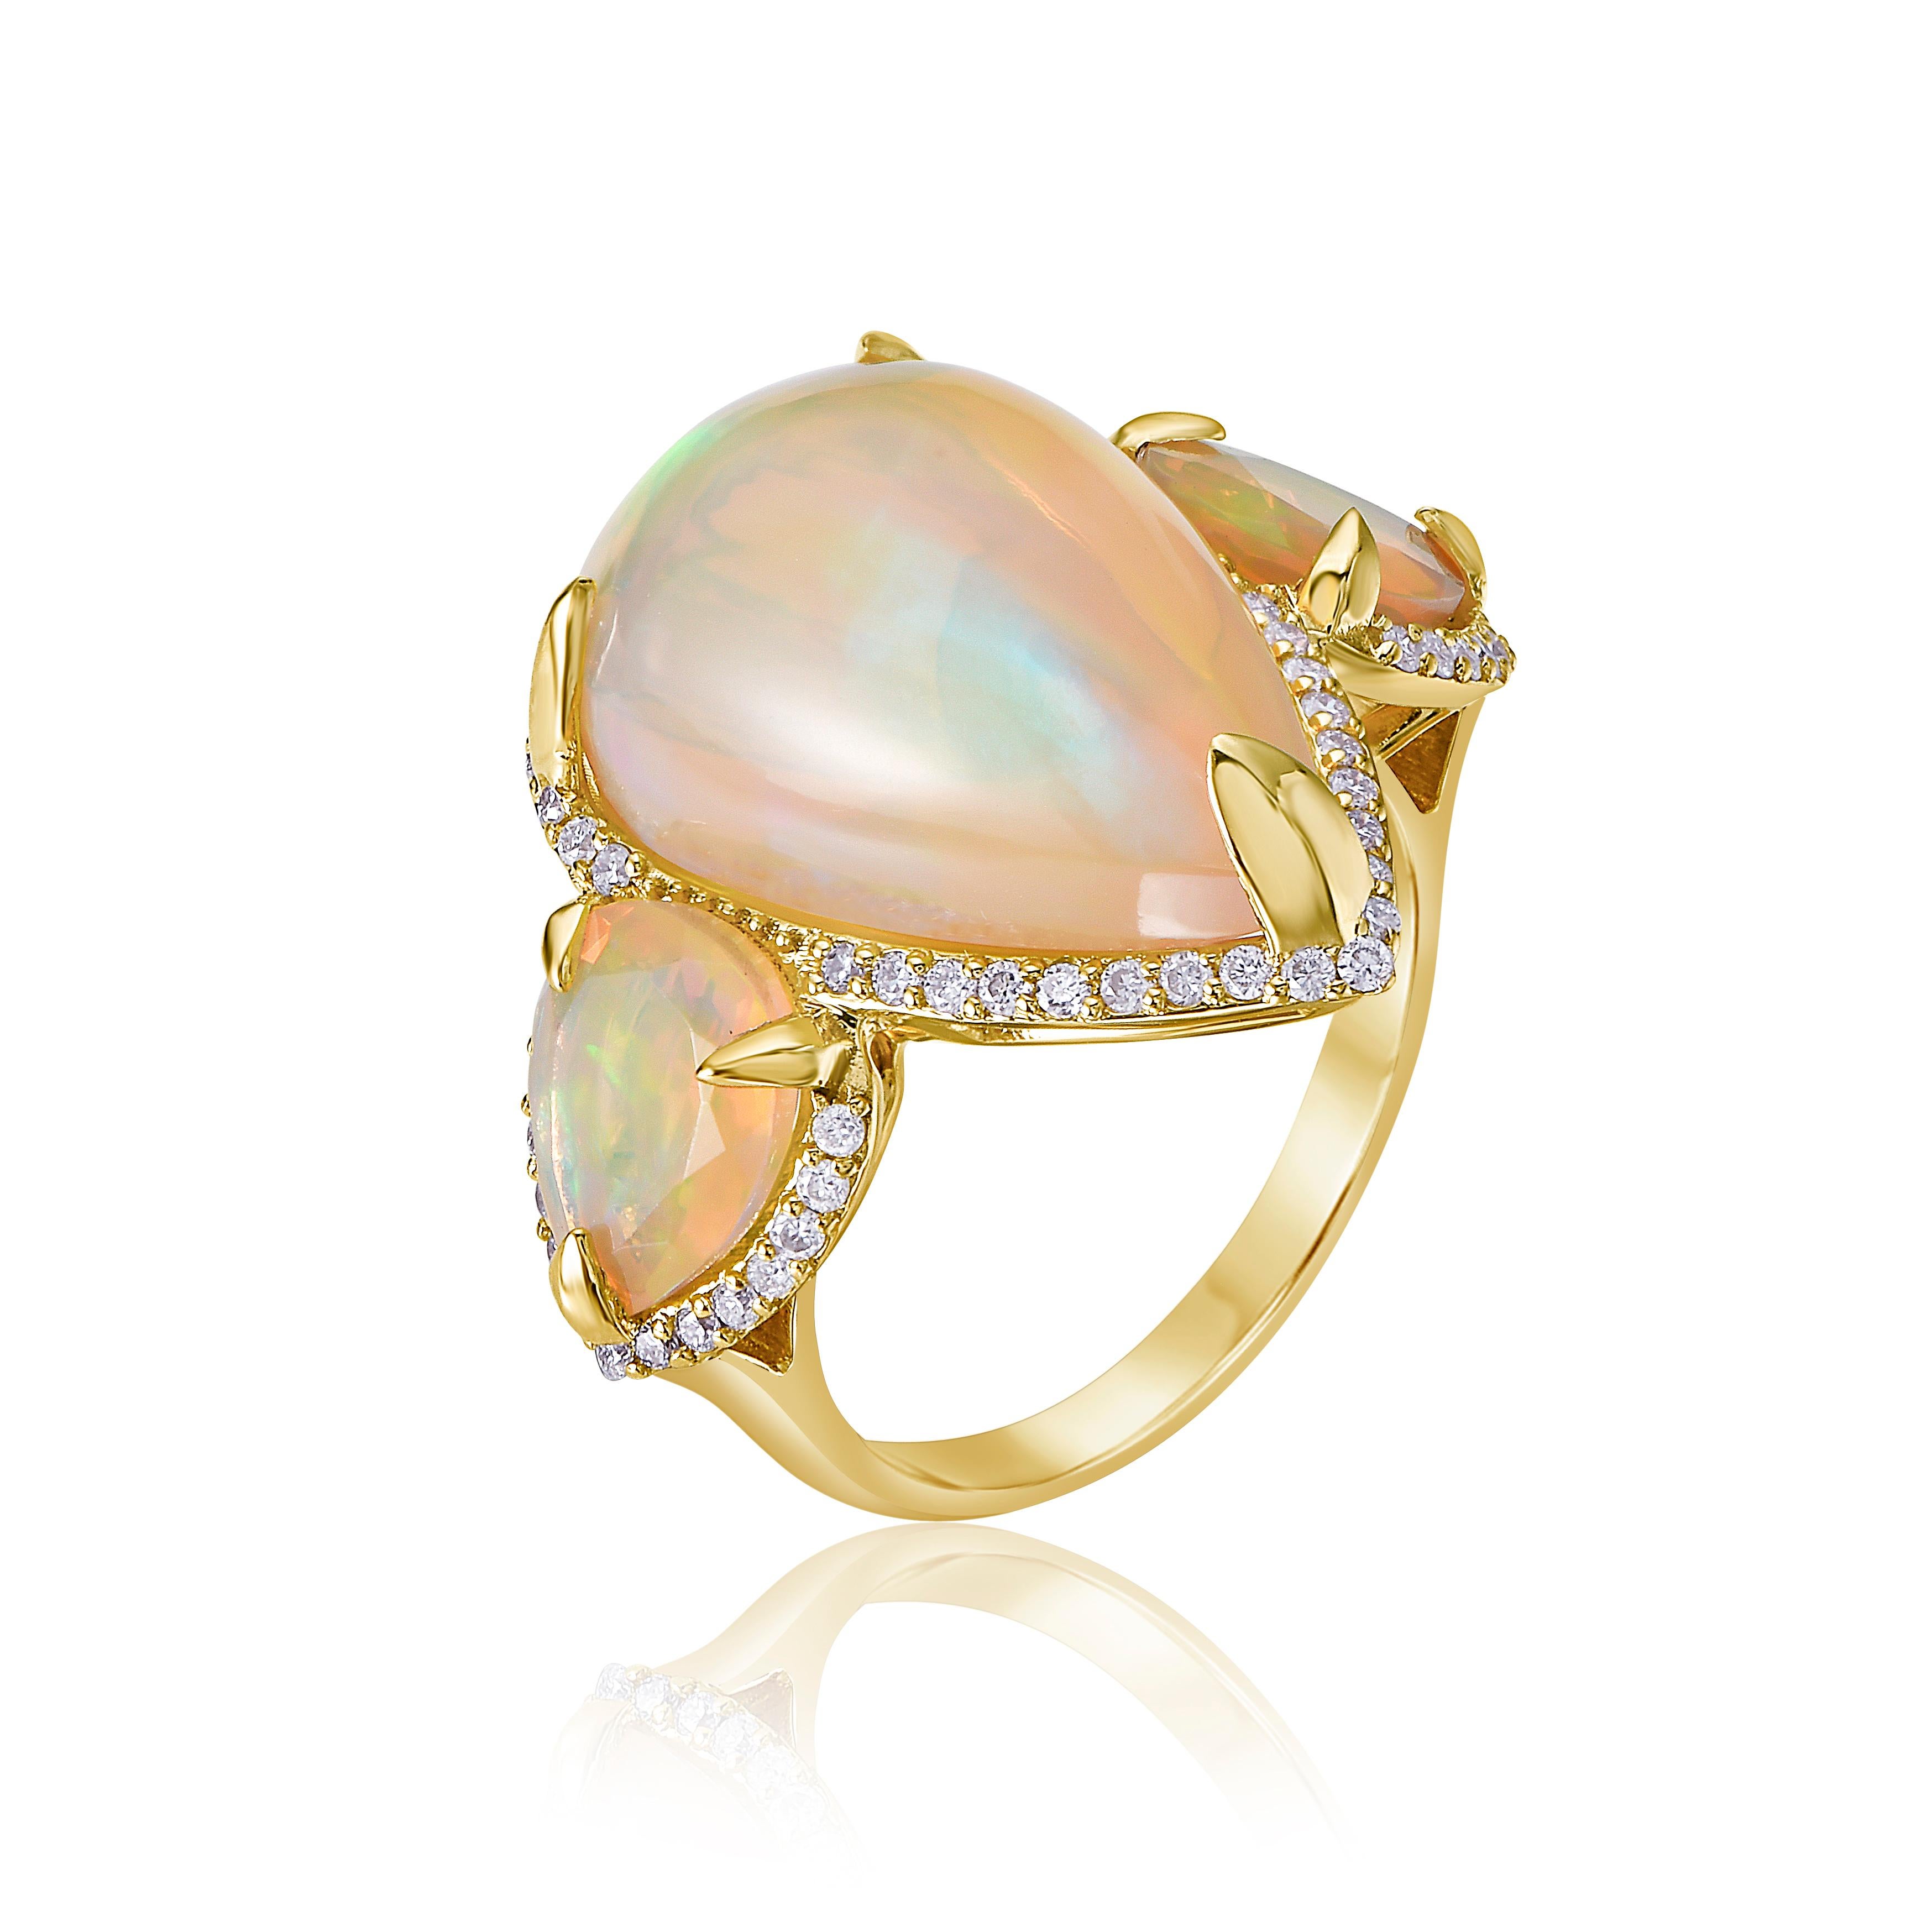 Fire Opal 18k Gold Diamond Unicorn Ring. Handcrafted designer ring in 18k yellow gold with 11.06ct natural fire opals and 0.76ct diamonds. 

A statement of elegance and wisdom, fire opals symbolize passion and creativity. The magical tales of